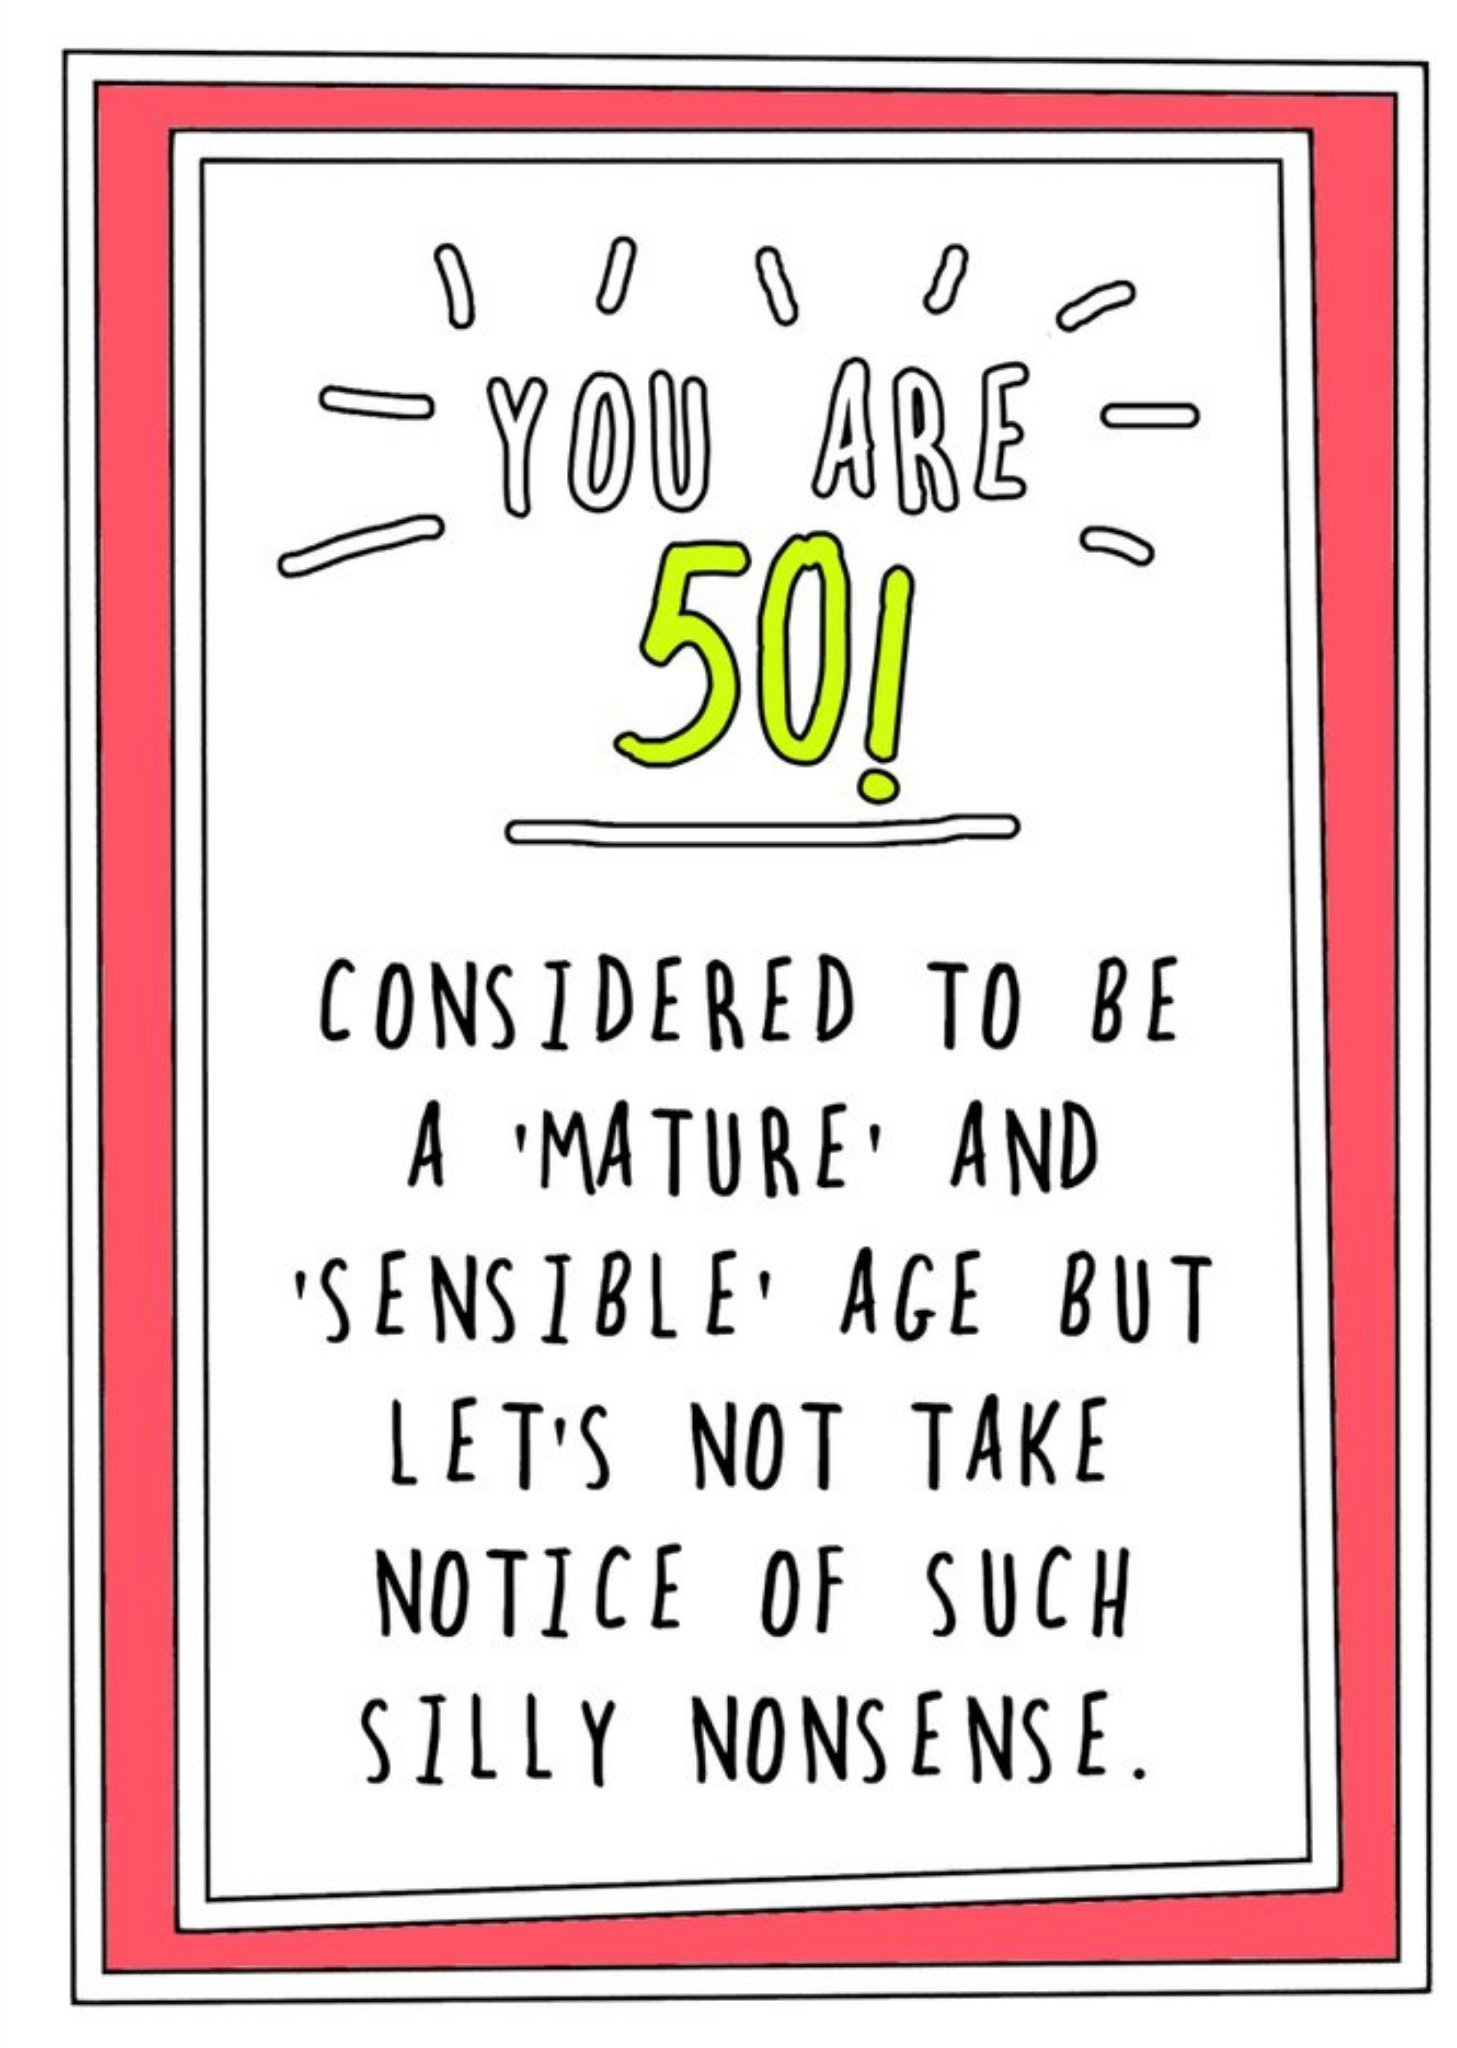 Go La La Funny Cheeky You Are 50 Considered To Be A Mature And Sensible Age Birthday Card, Large